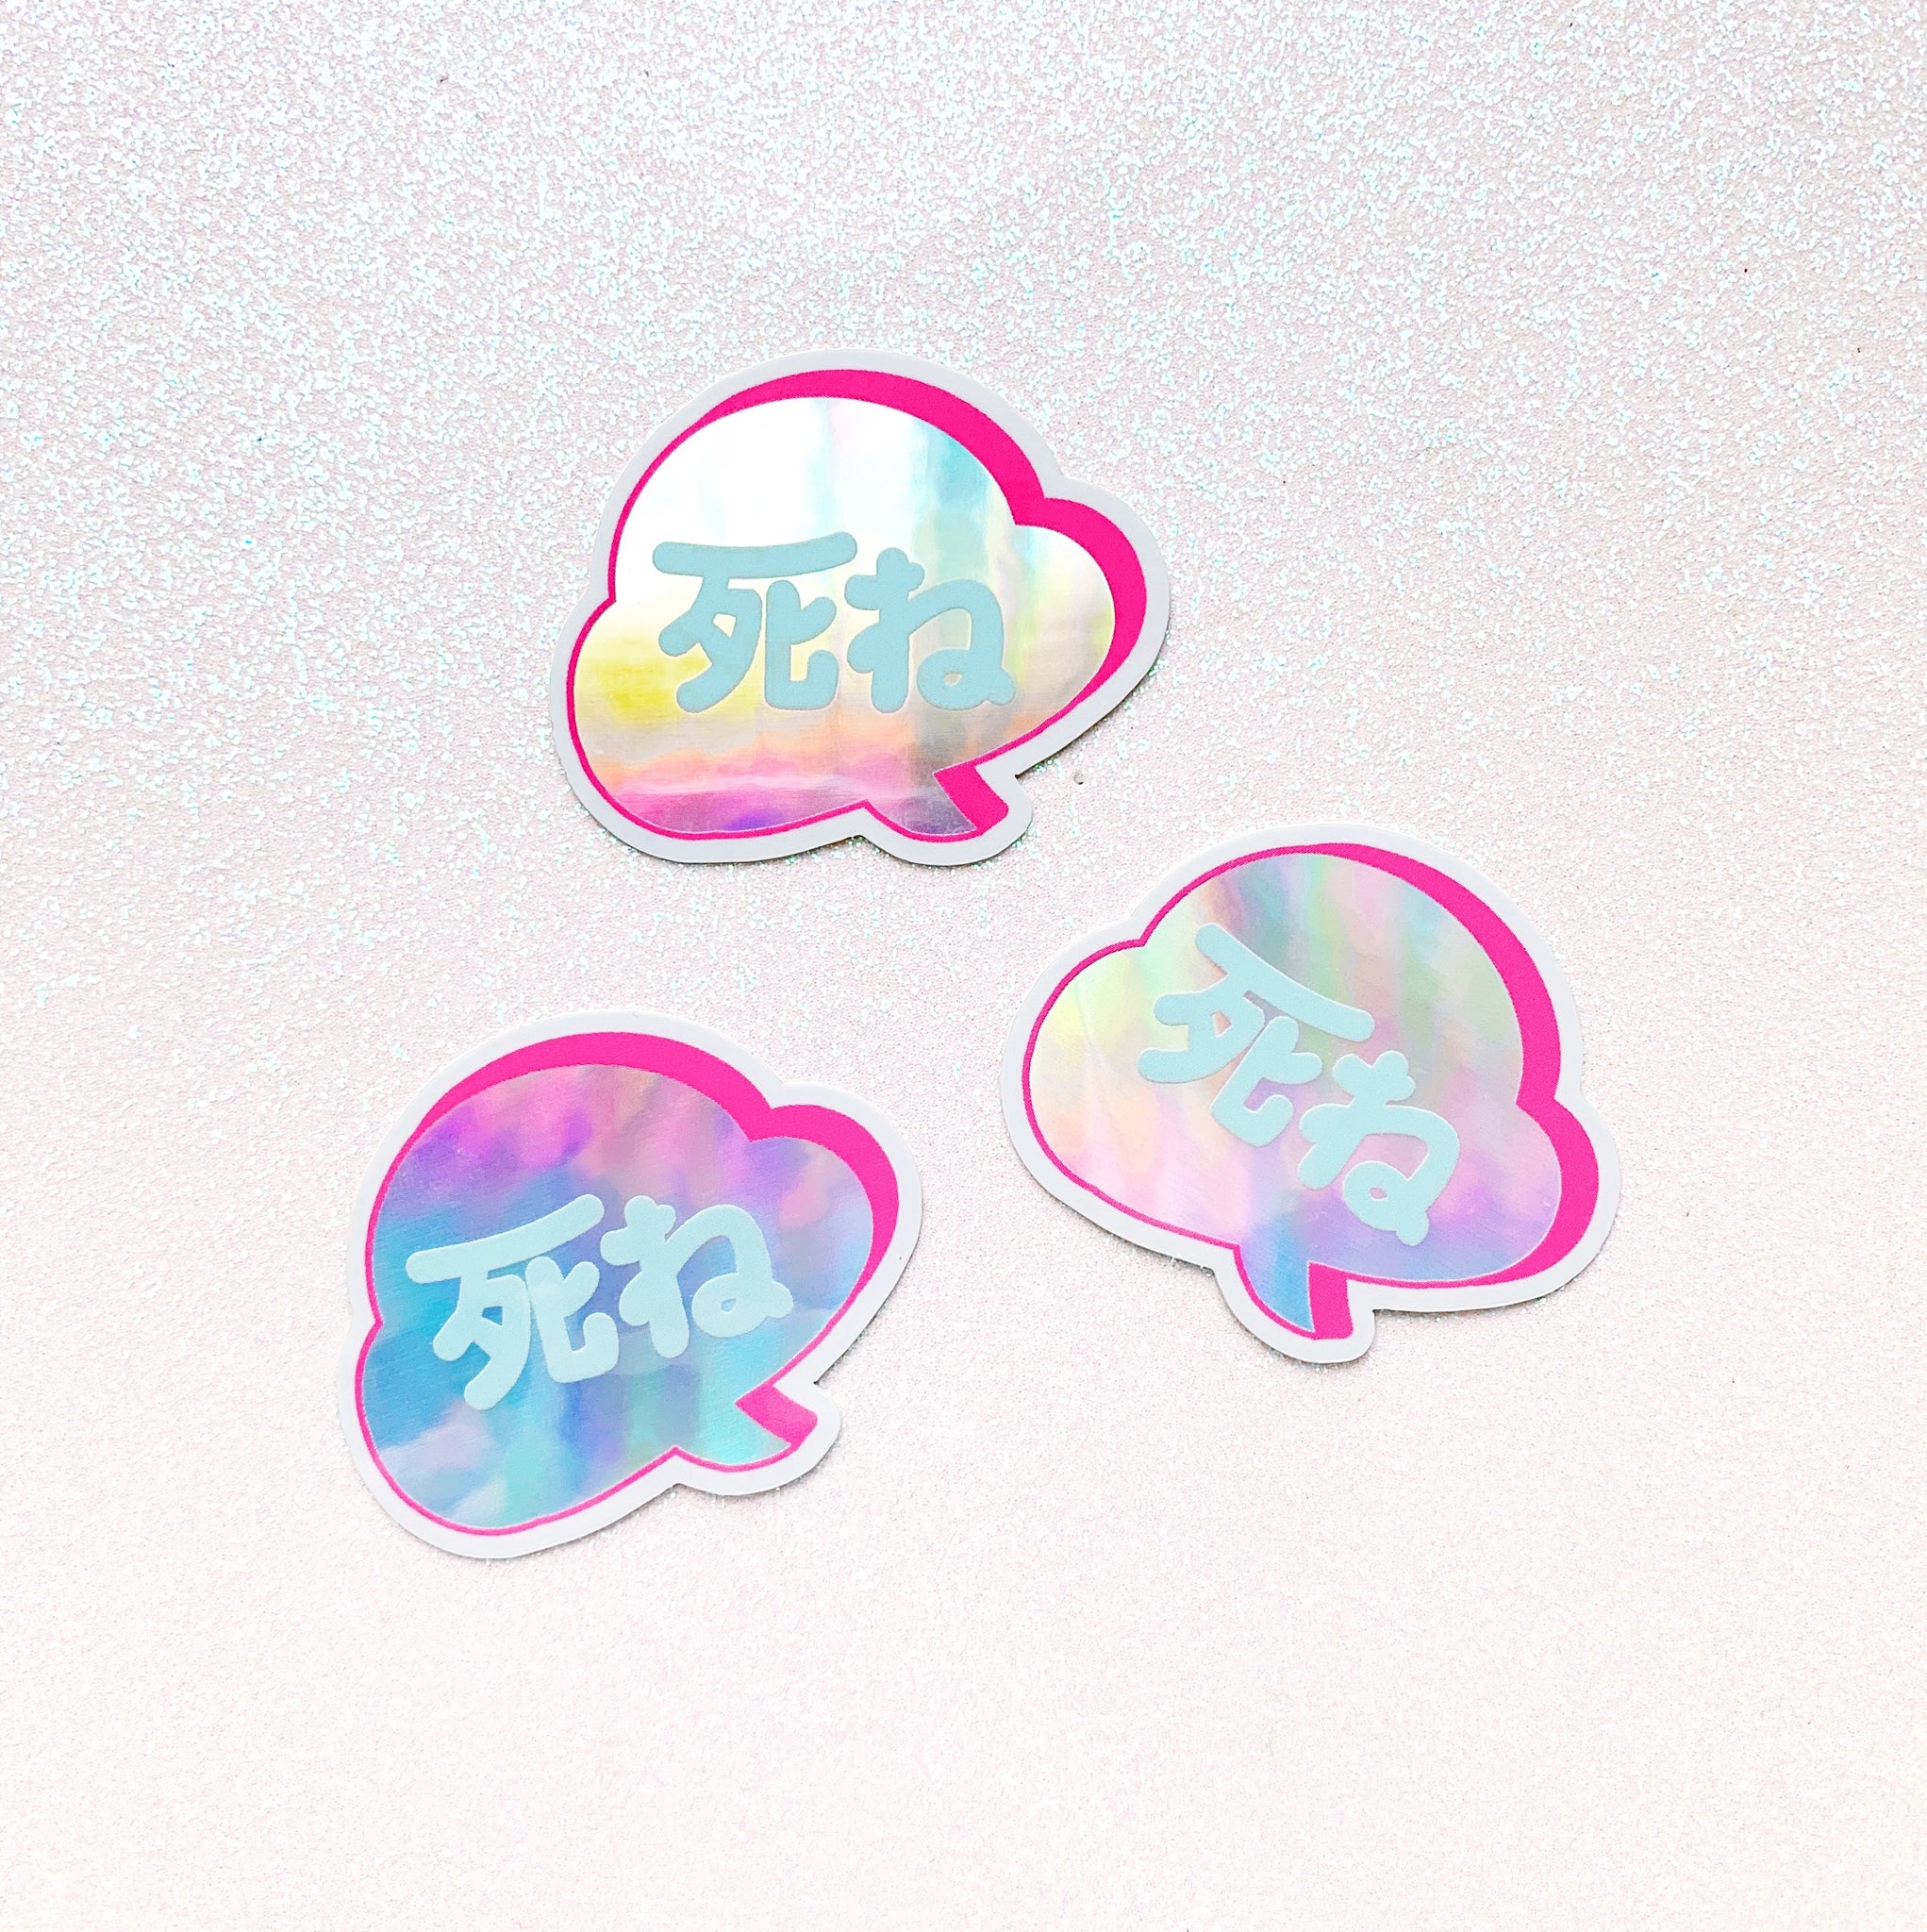 "die!" holographic stickers